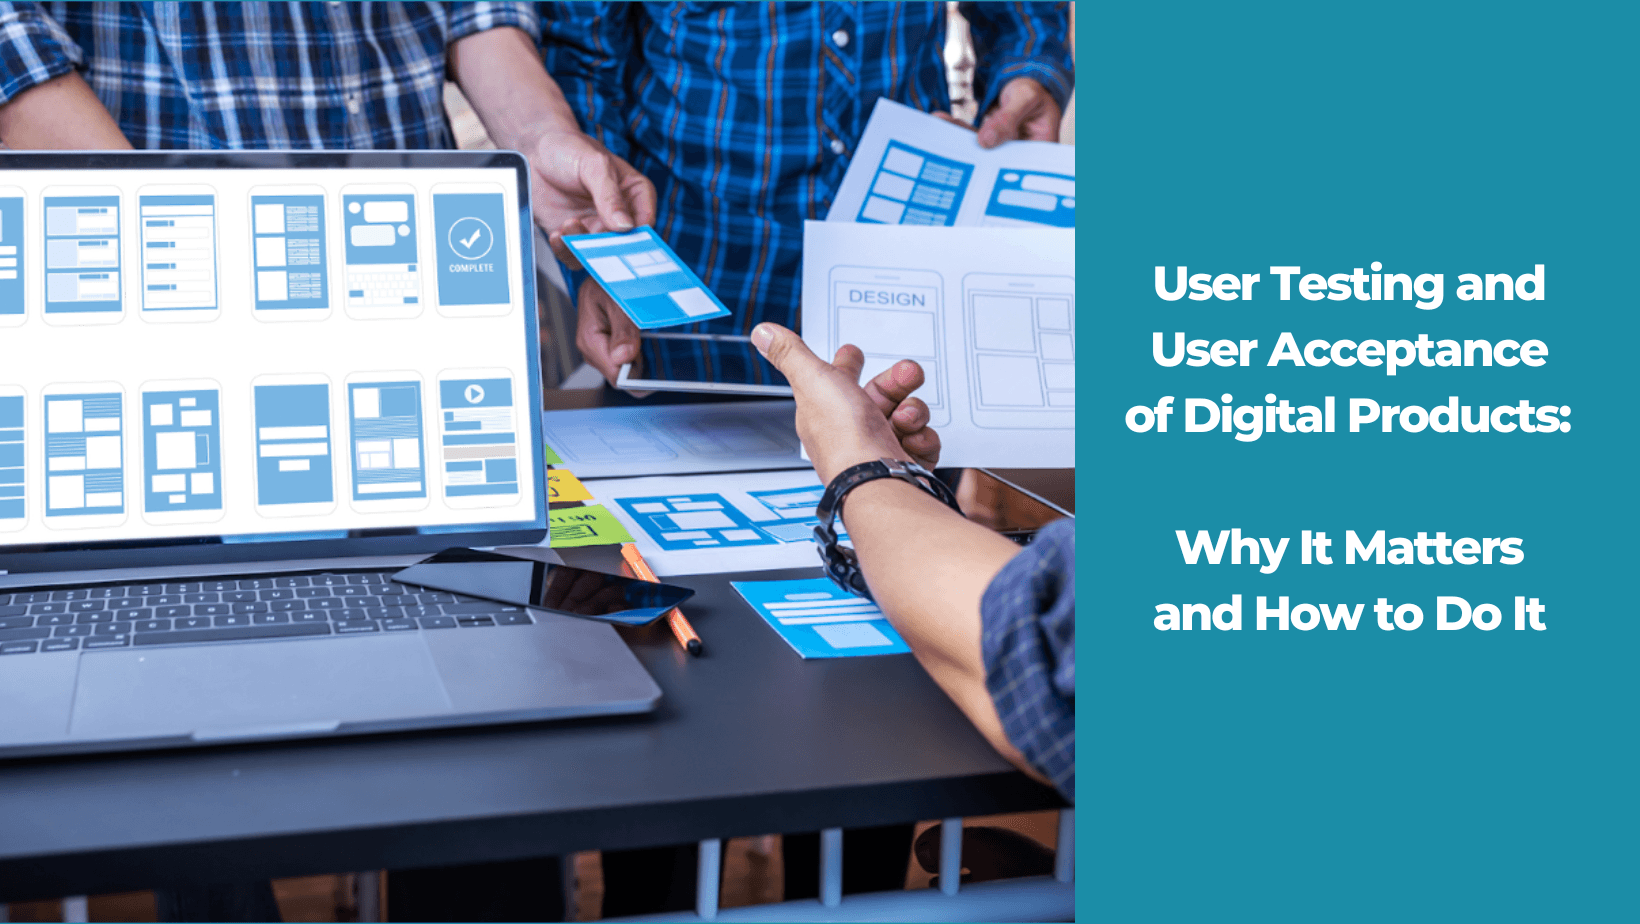 User Testing and User Acceptance of Digital Products: Why It Matters and How to Do It